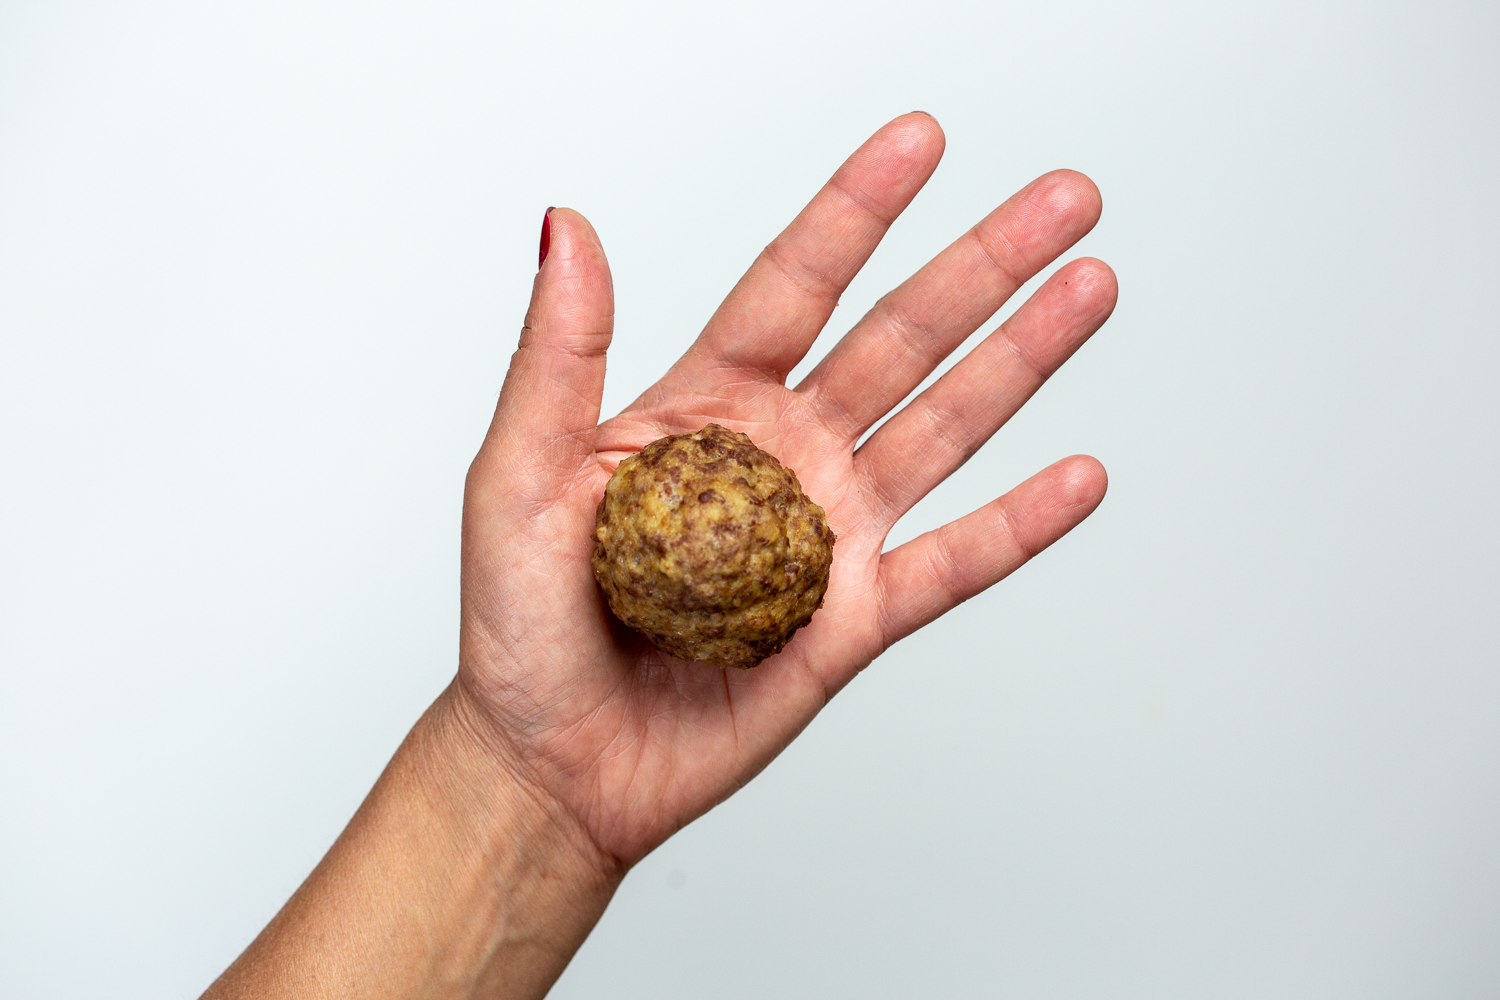 A hand holding a large soft meatball for babies 6 mos+